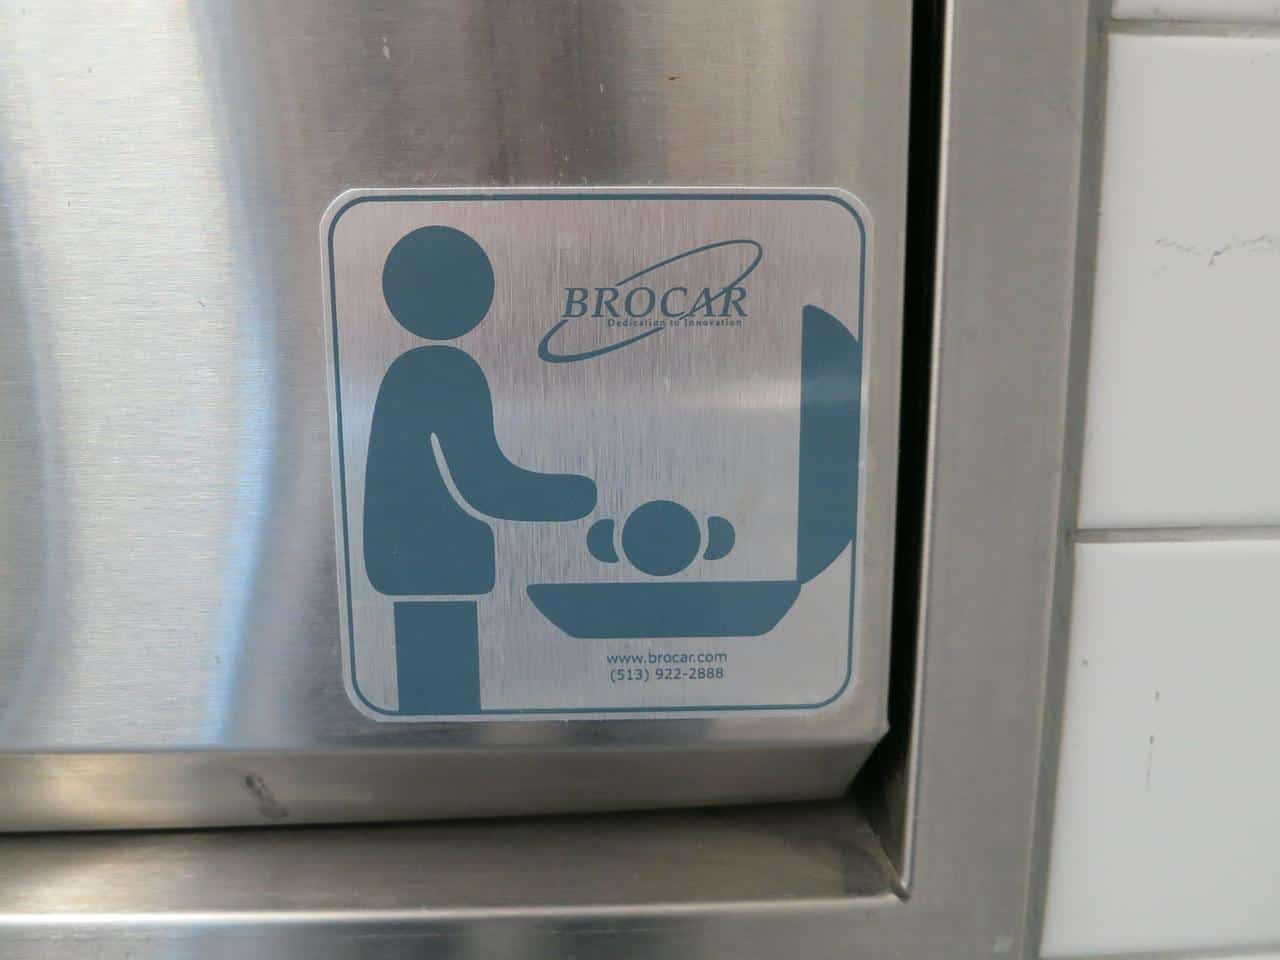 a silver baby changing station in a public restroom